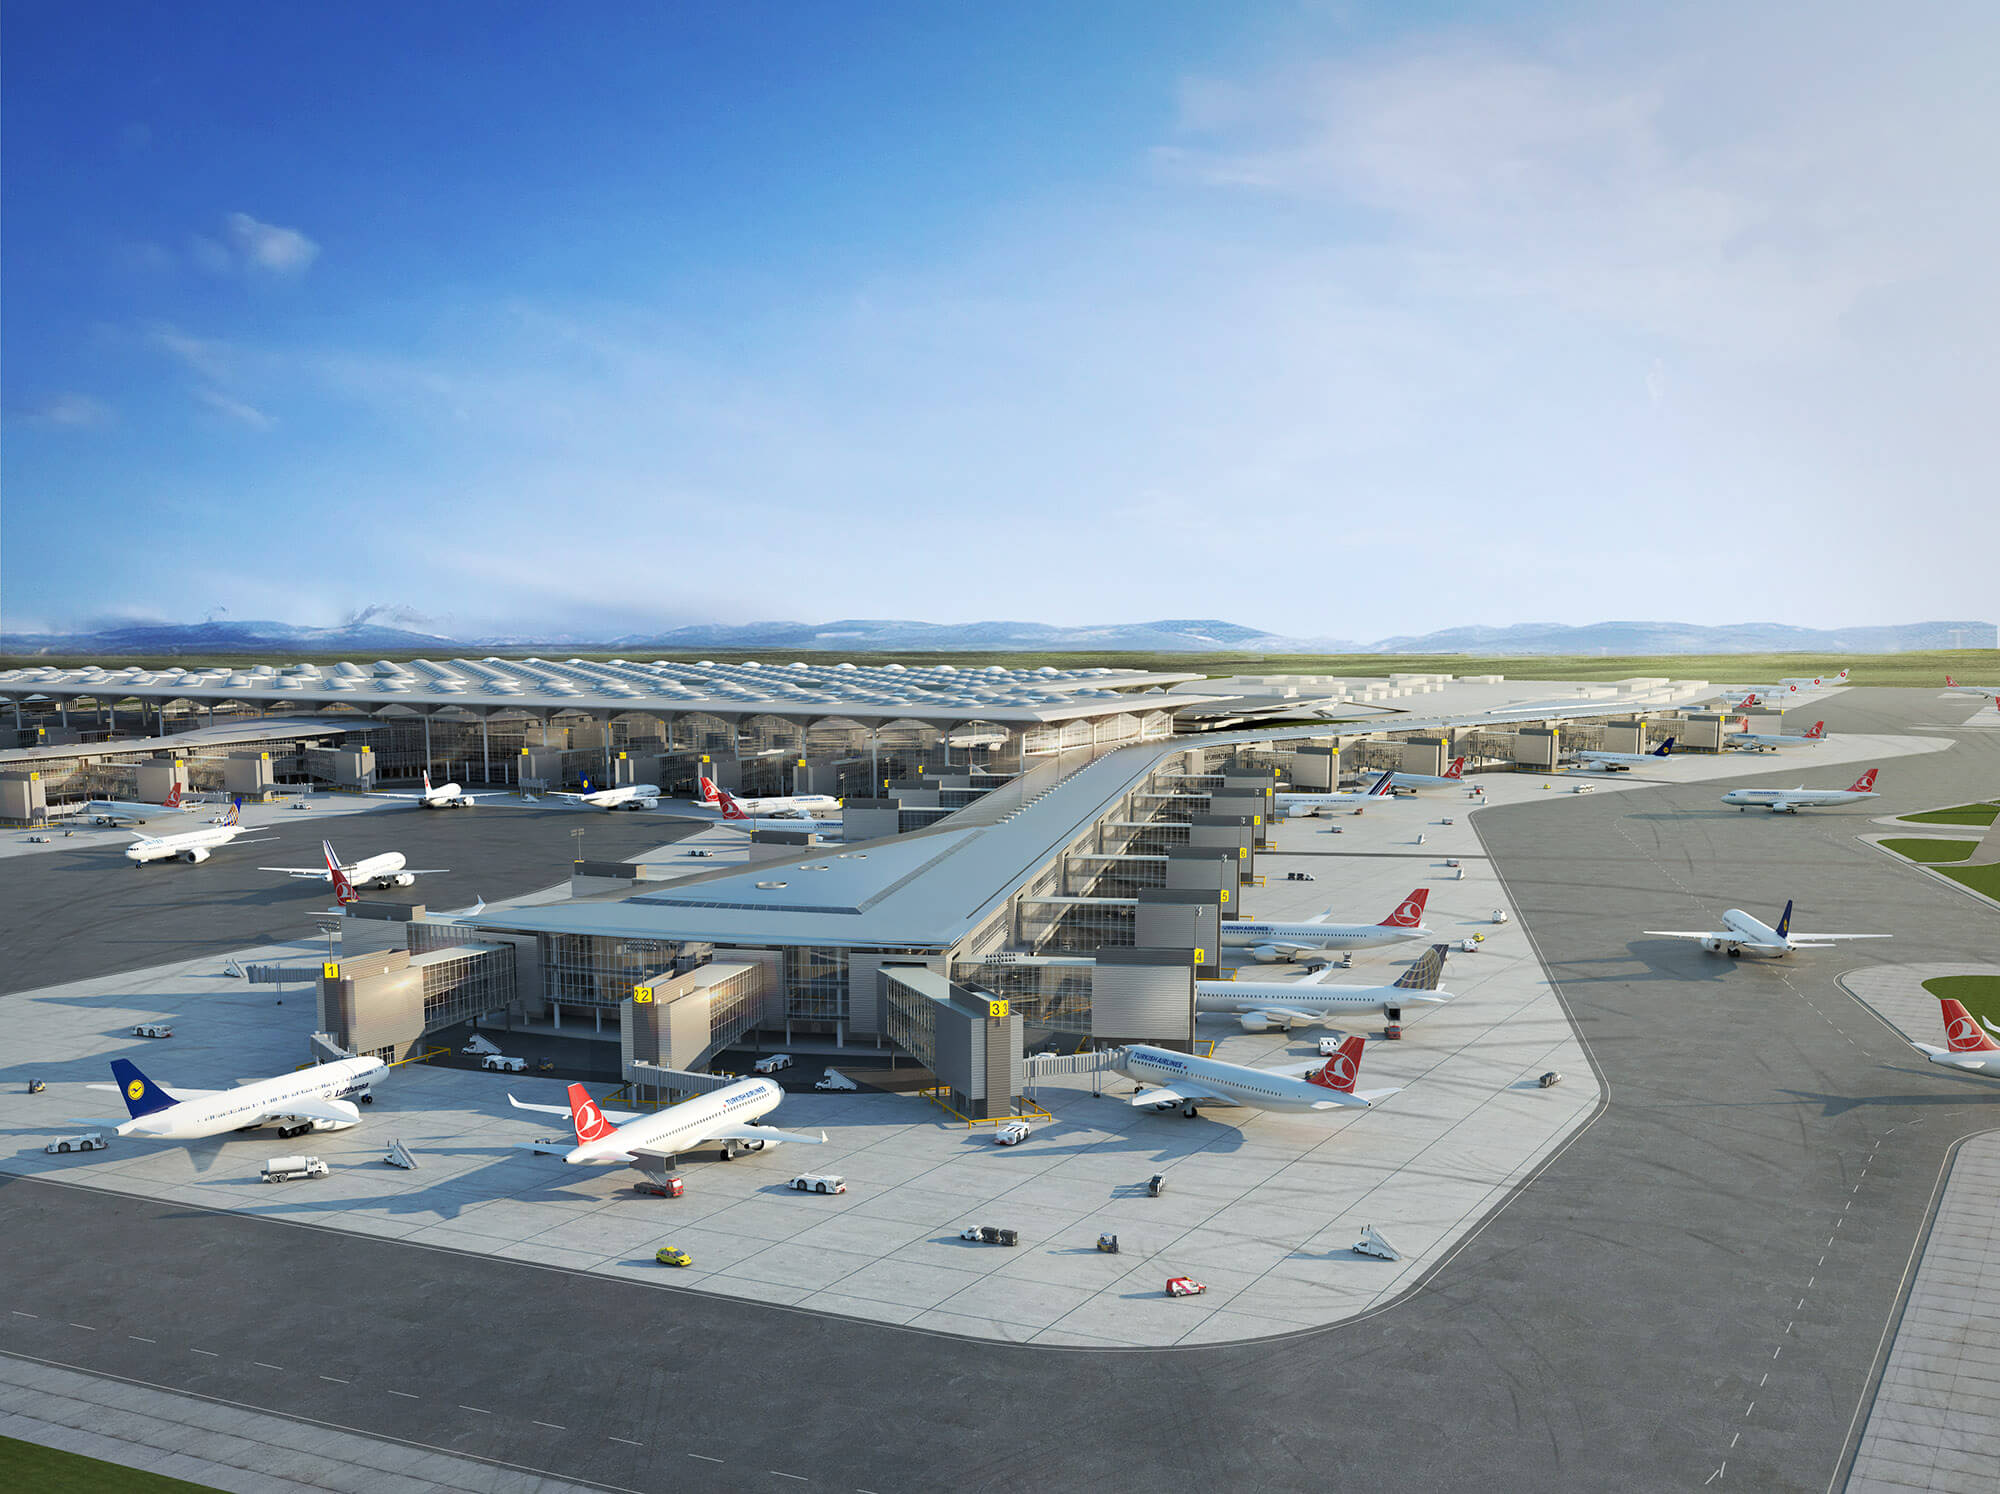 New Istanbul Airport image1